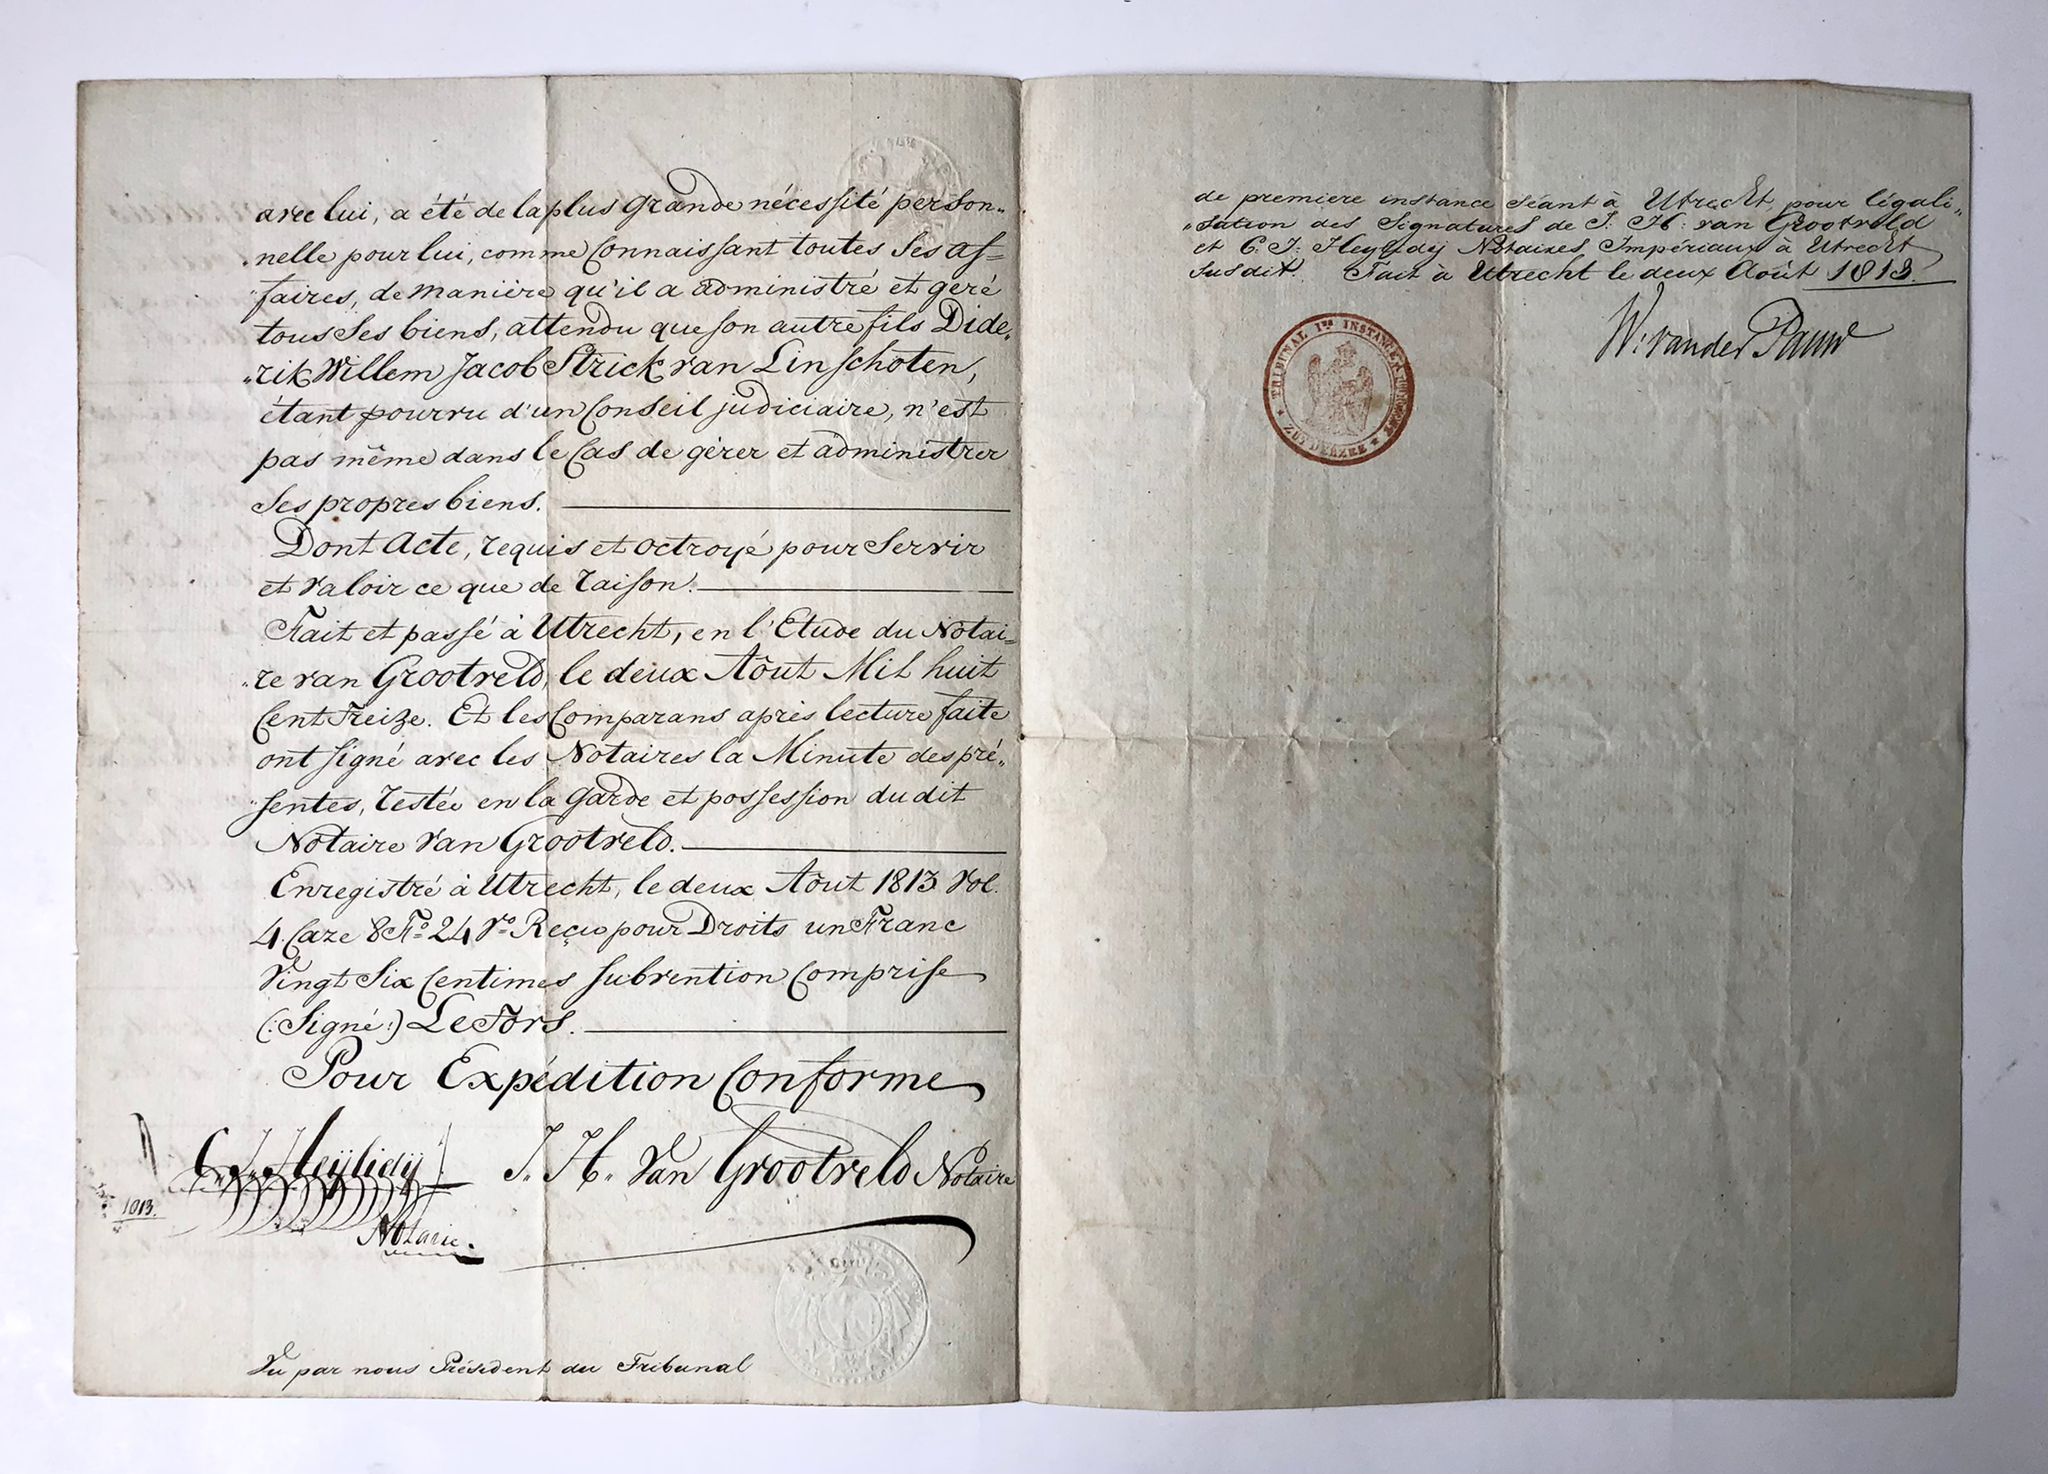 [Manuscript, 1813, legal with seal] Notarial deed Utrecht 2-8-1813, folio, 3 pp.